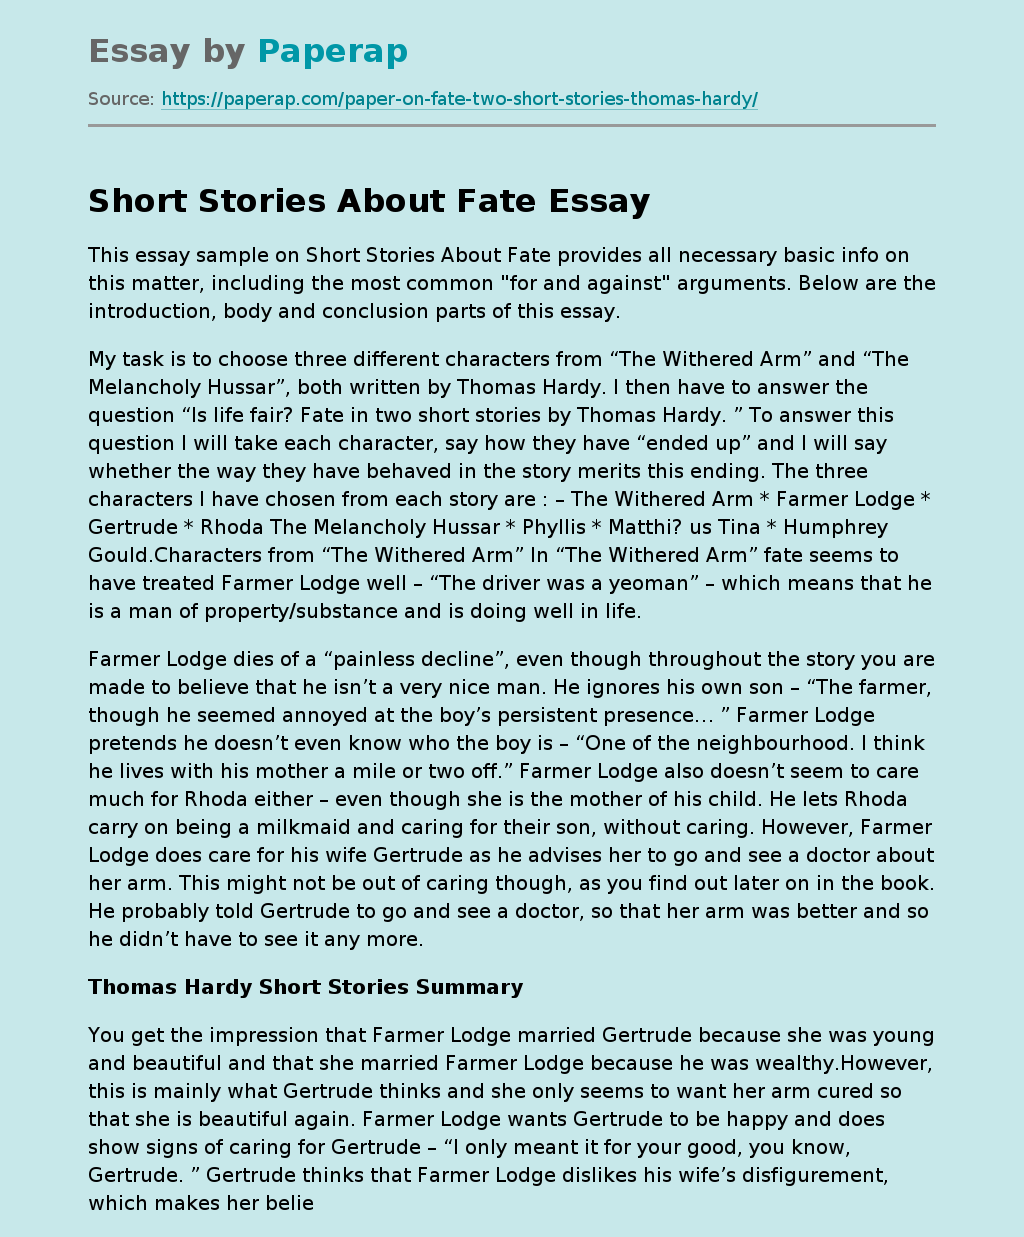 Short Stories About Fate